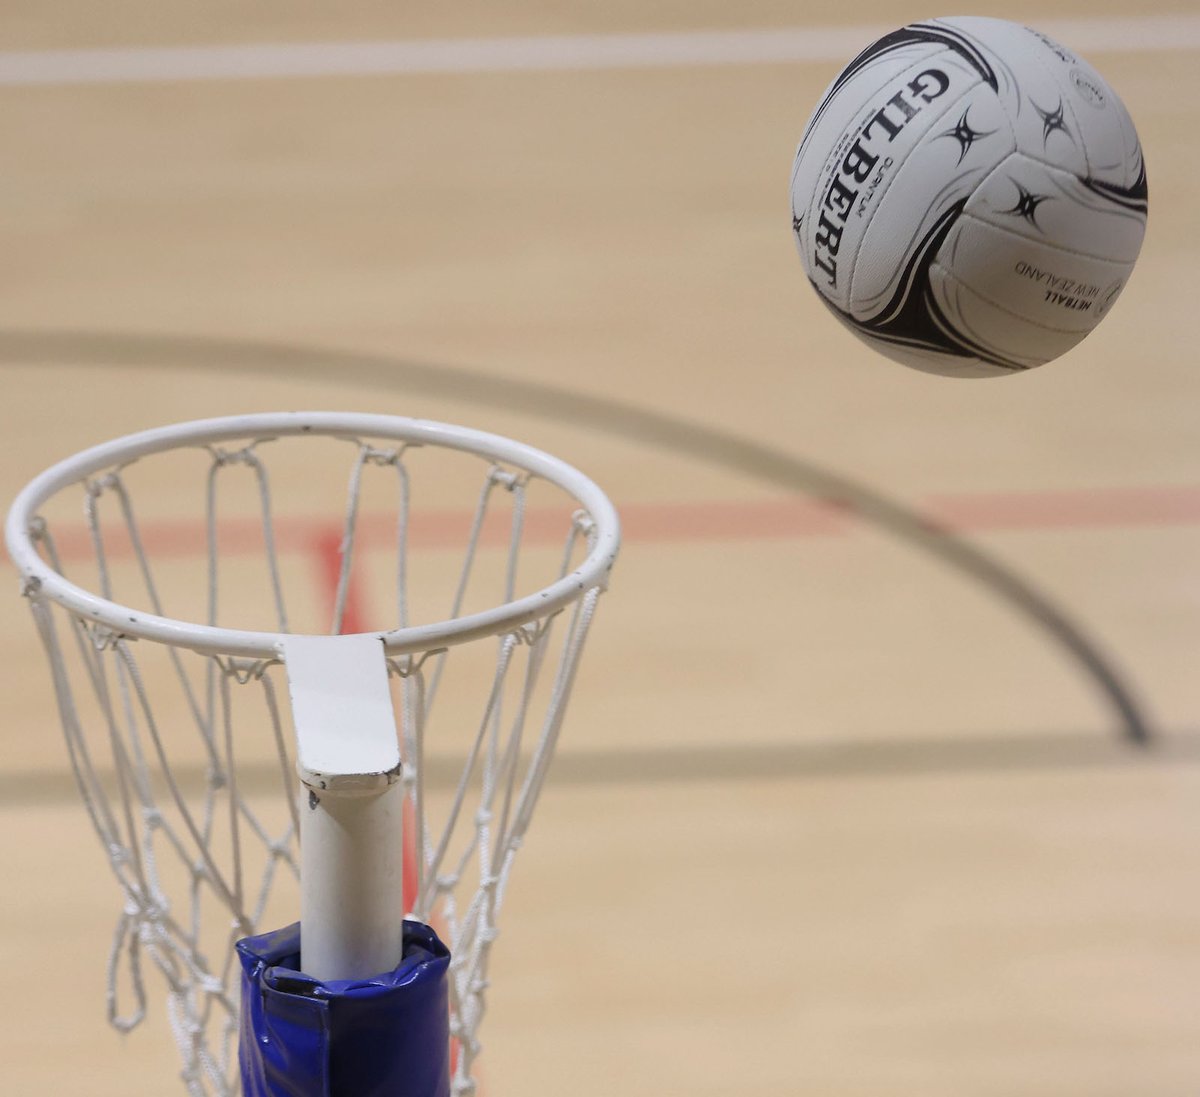 Four North Island teams put their markers in the sand as title prospects after the second day’s play of the Netball NZ Secondary School Champs in Auckland on Wednesday. Read full day two wrap: bit.ly/45x5siR